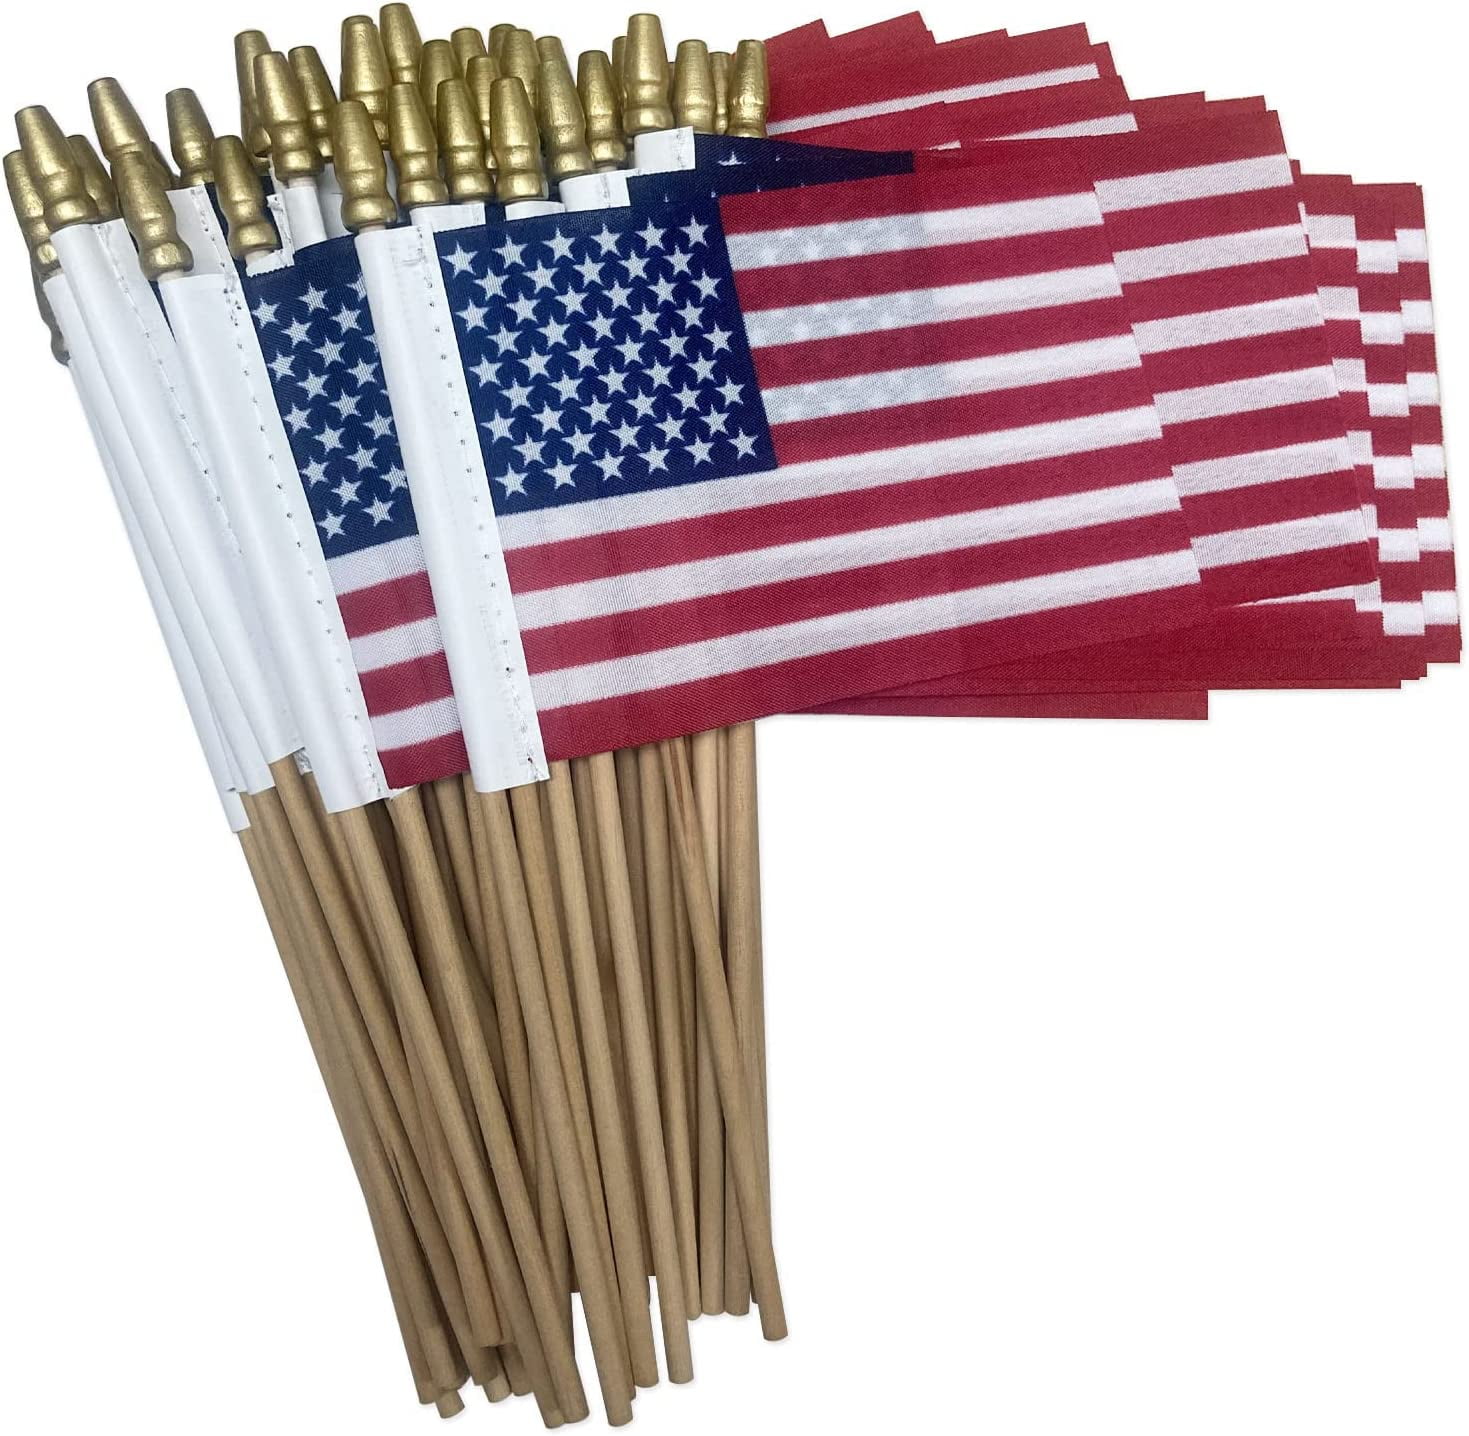 FLAGWIN 50 Pack Small American Flags on Stick 4x6 in Mini American Flag  with 10 Inch Wooden Stick and Spear Finial USA Stick Flag Made in USA 